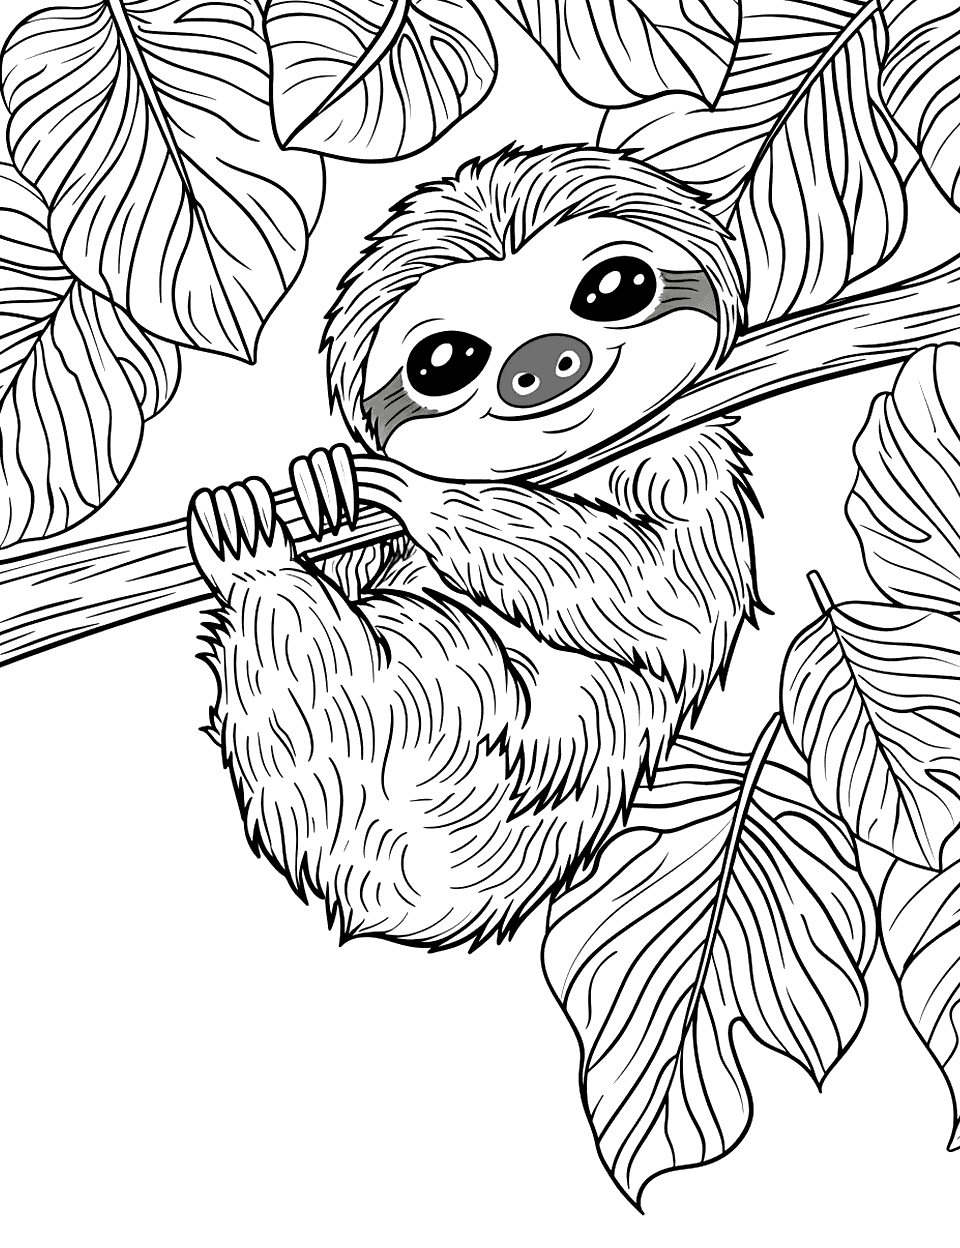 Cute Baby Sloth Hanging from a Tree Coloring Page - A small, adorable baby sloth clings to a branch with a broad smile, surrounded by large green leaves.